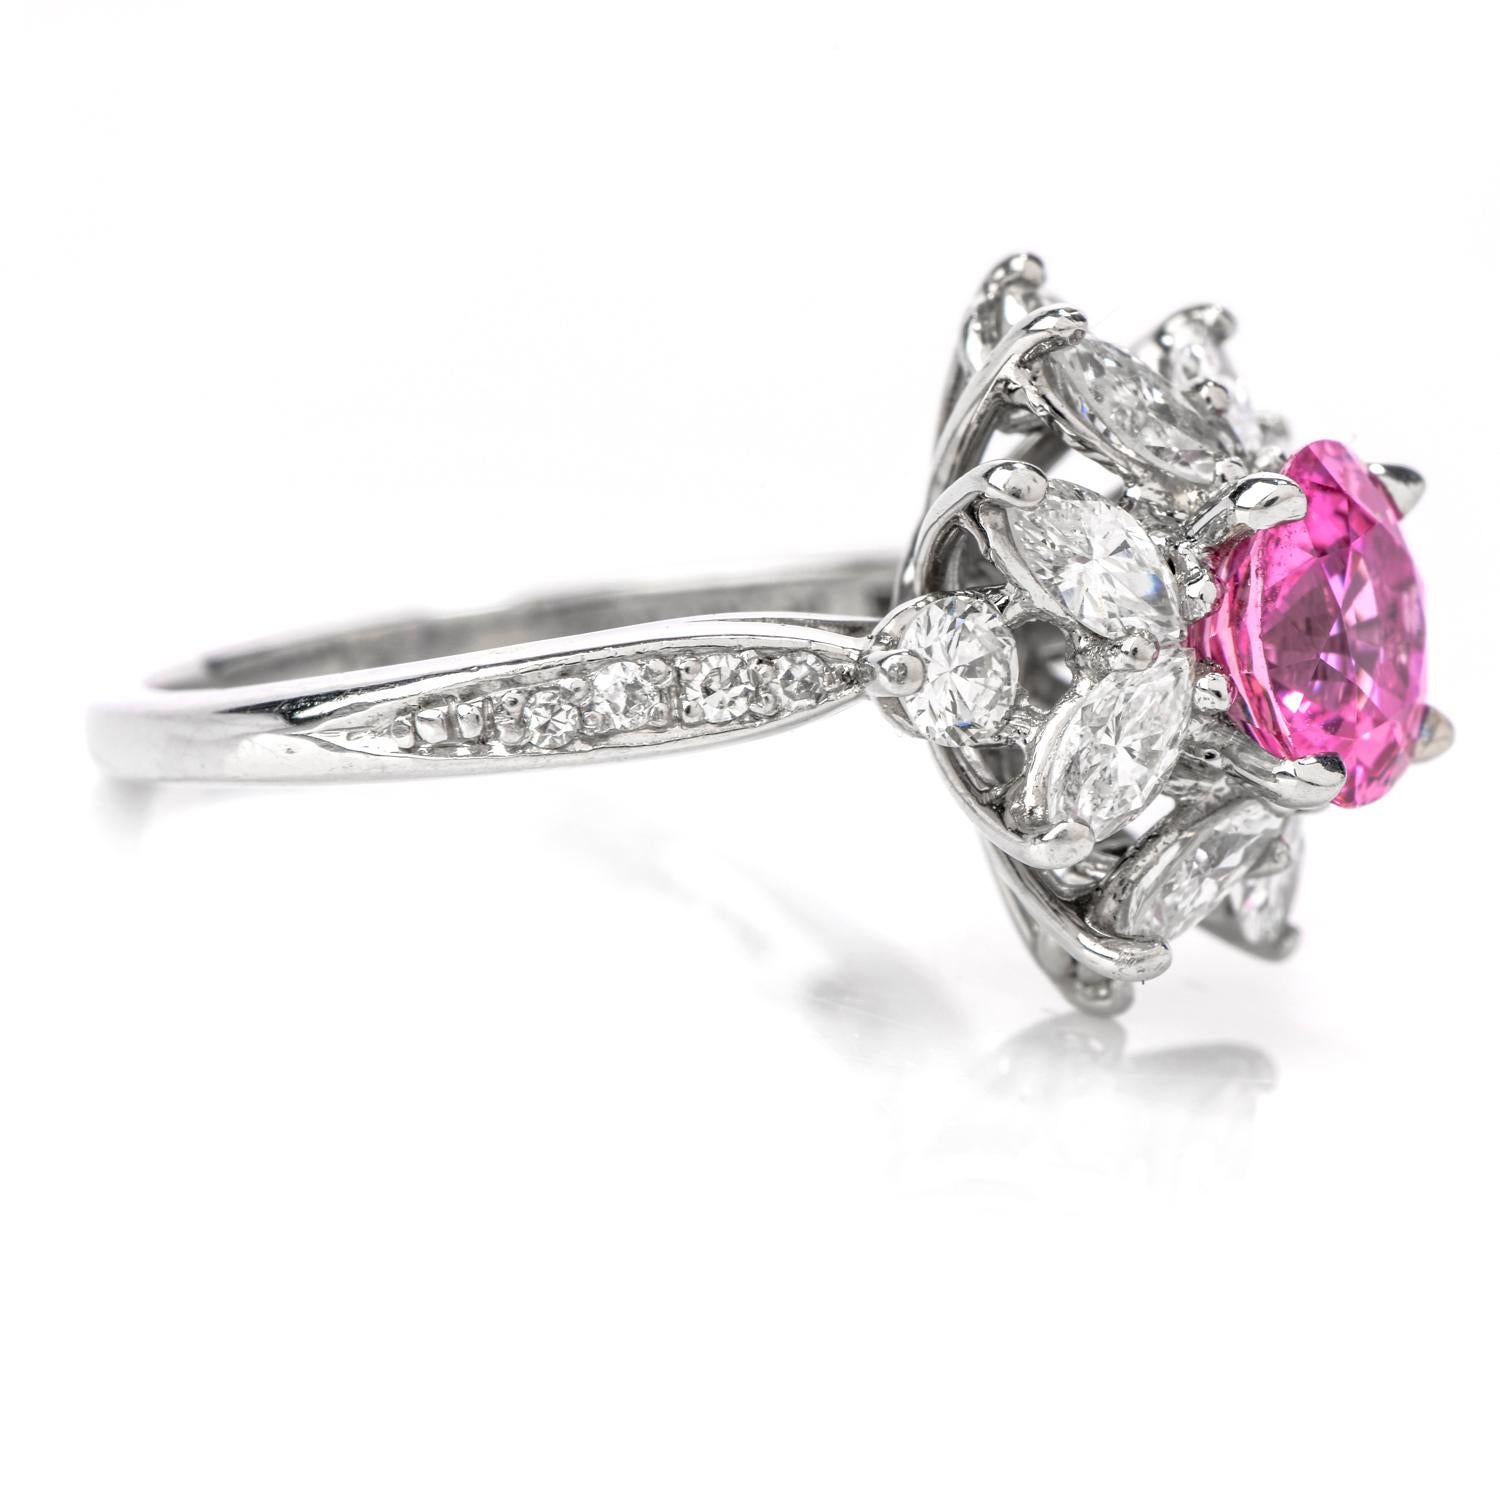 Feel pretty in pink, with this romantic Tiffany & Co. Diamond Pink Sapphire Platinum Round Marquis Halo Ring!  This ring is crafted by the renowned Tiffany & Co. in quality platinum.  The center stone is 1 round pink sapphire, set by delicate claw